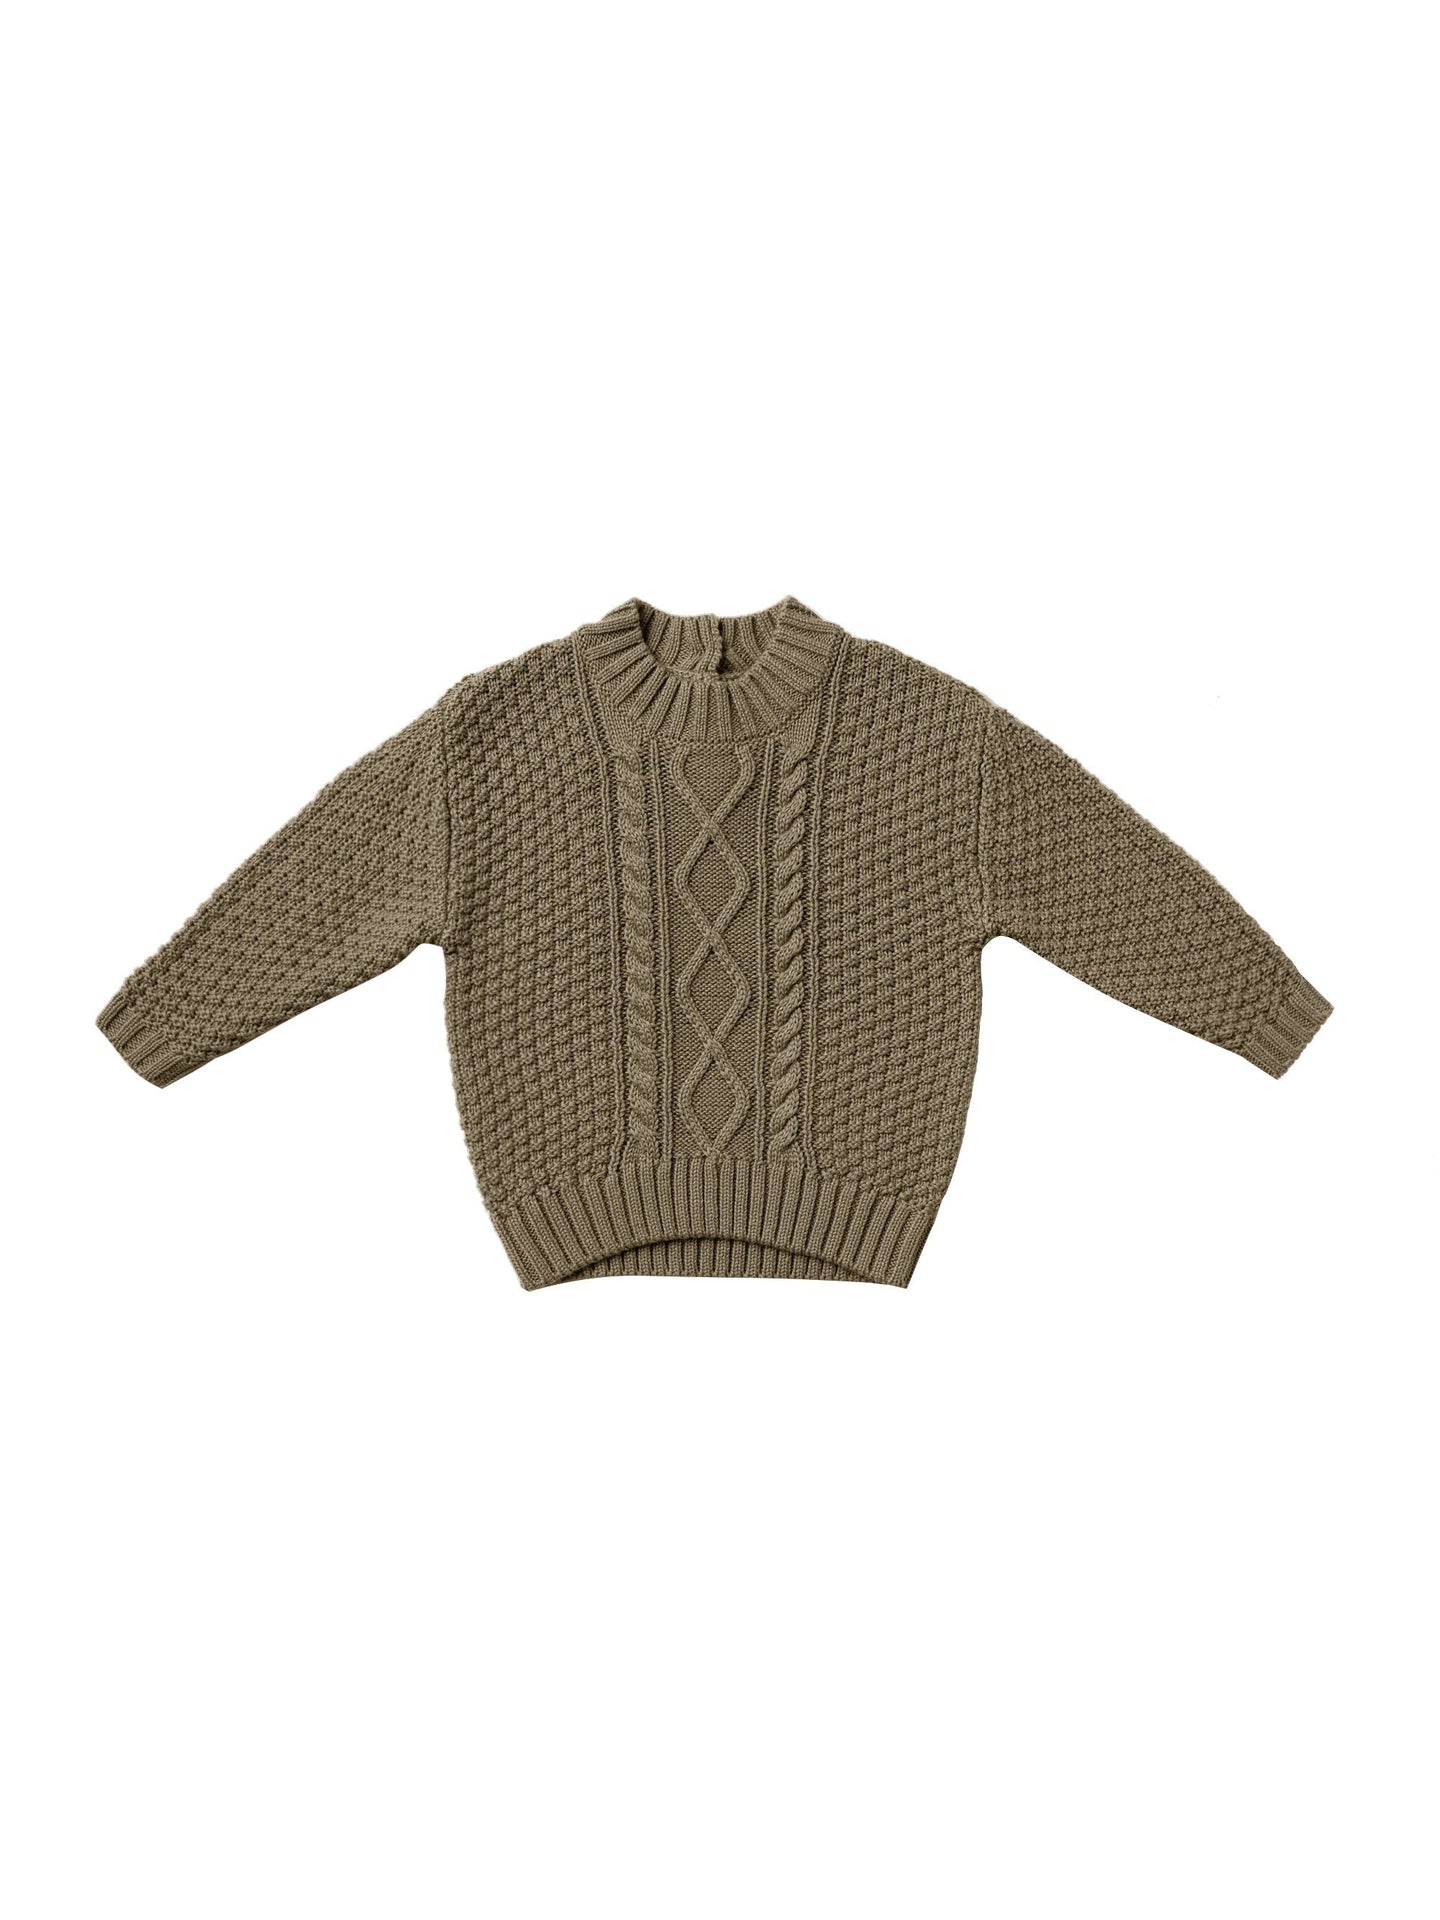 Quincy Mae - Organic Cable Knit Sweater - Olive